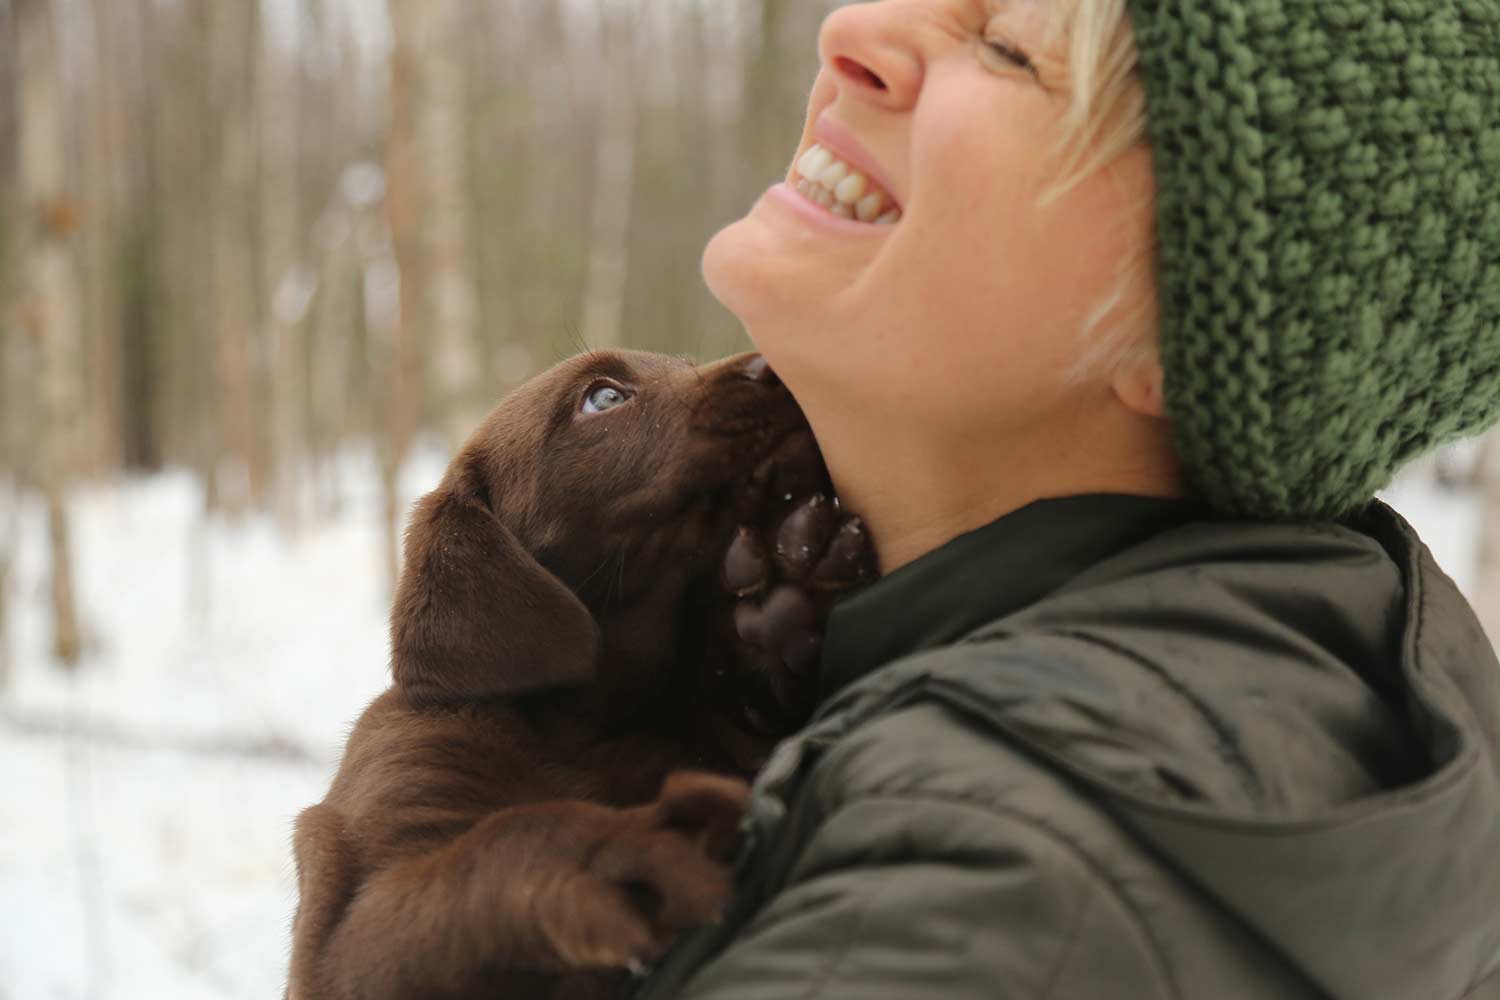 A woman hunter holds a chocolate lab puppy while standing in the snow.